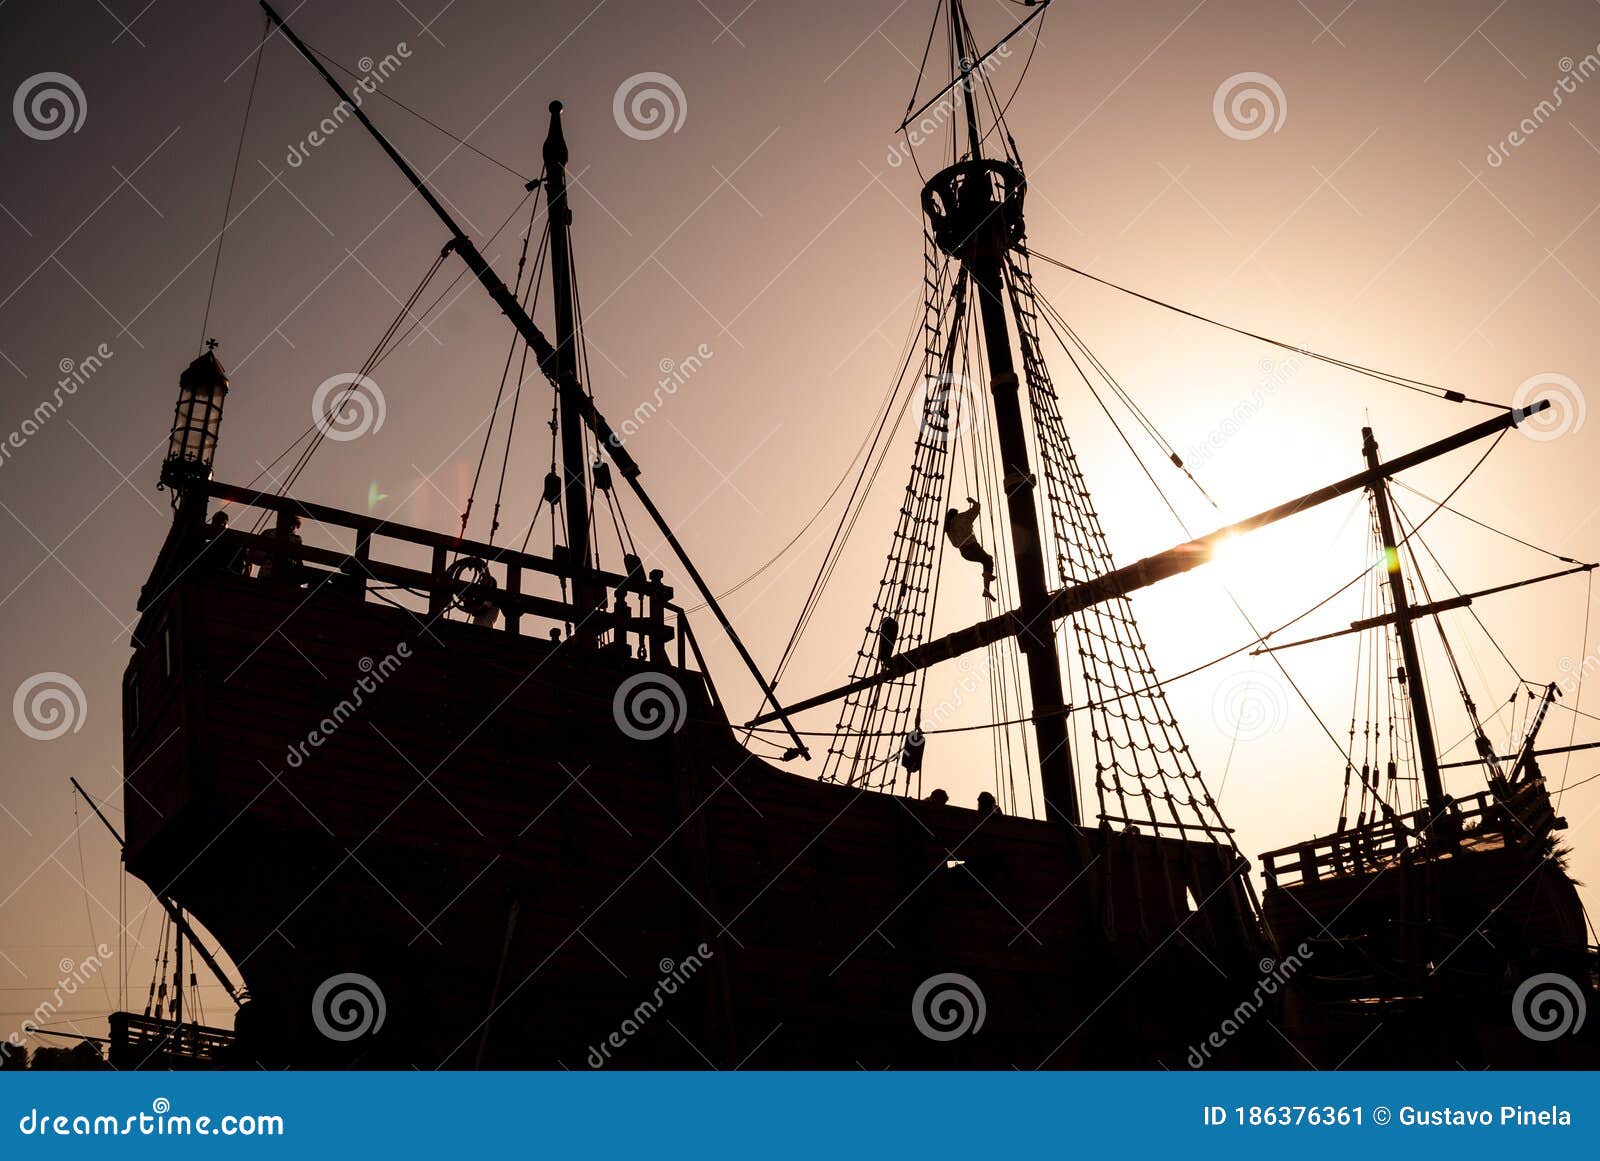 general shot, in silhouette, of an old caravel